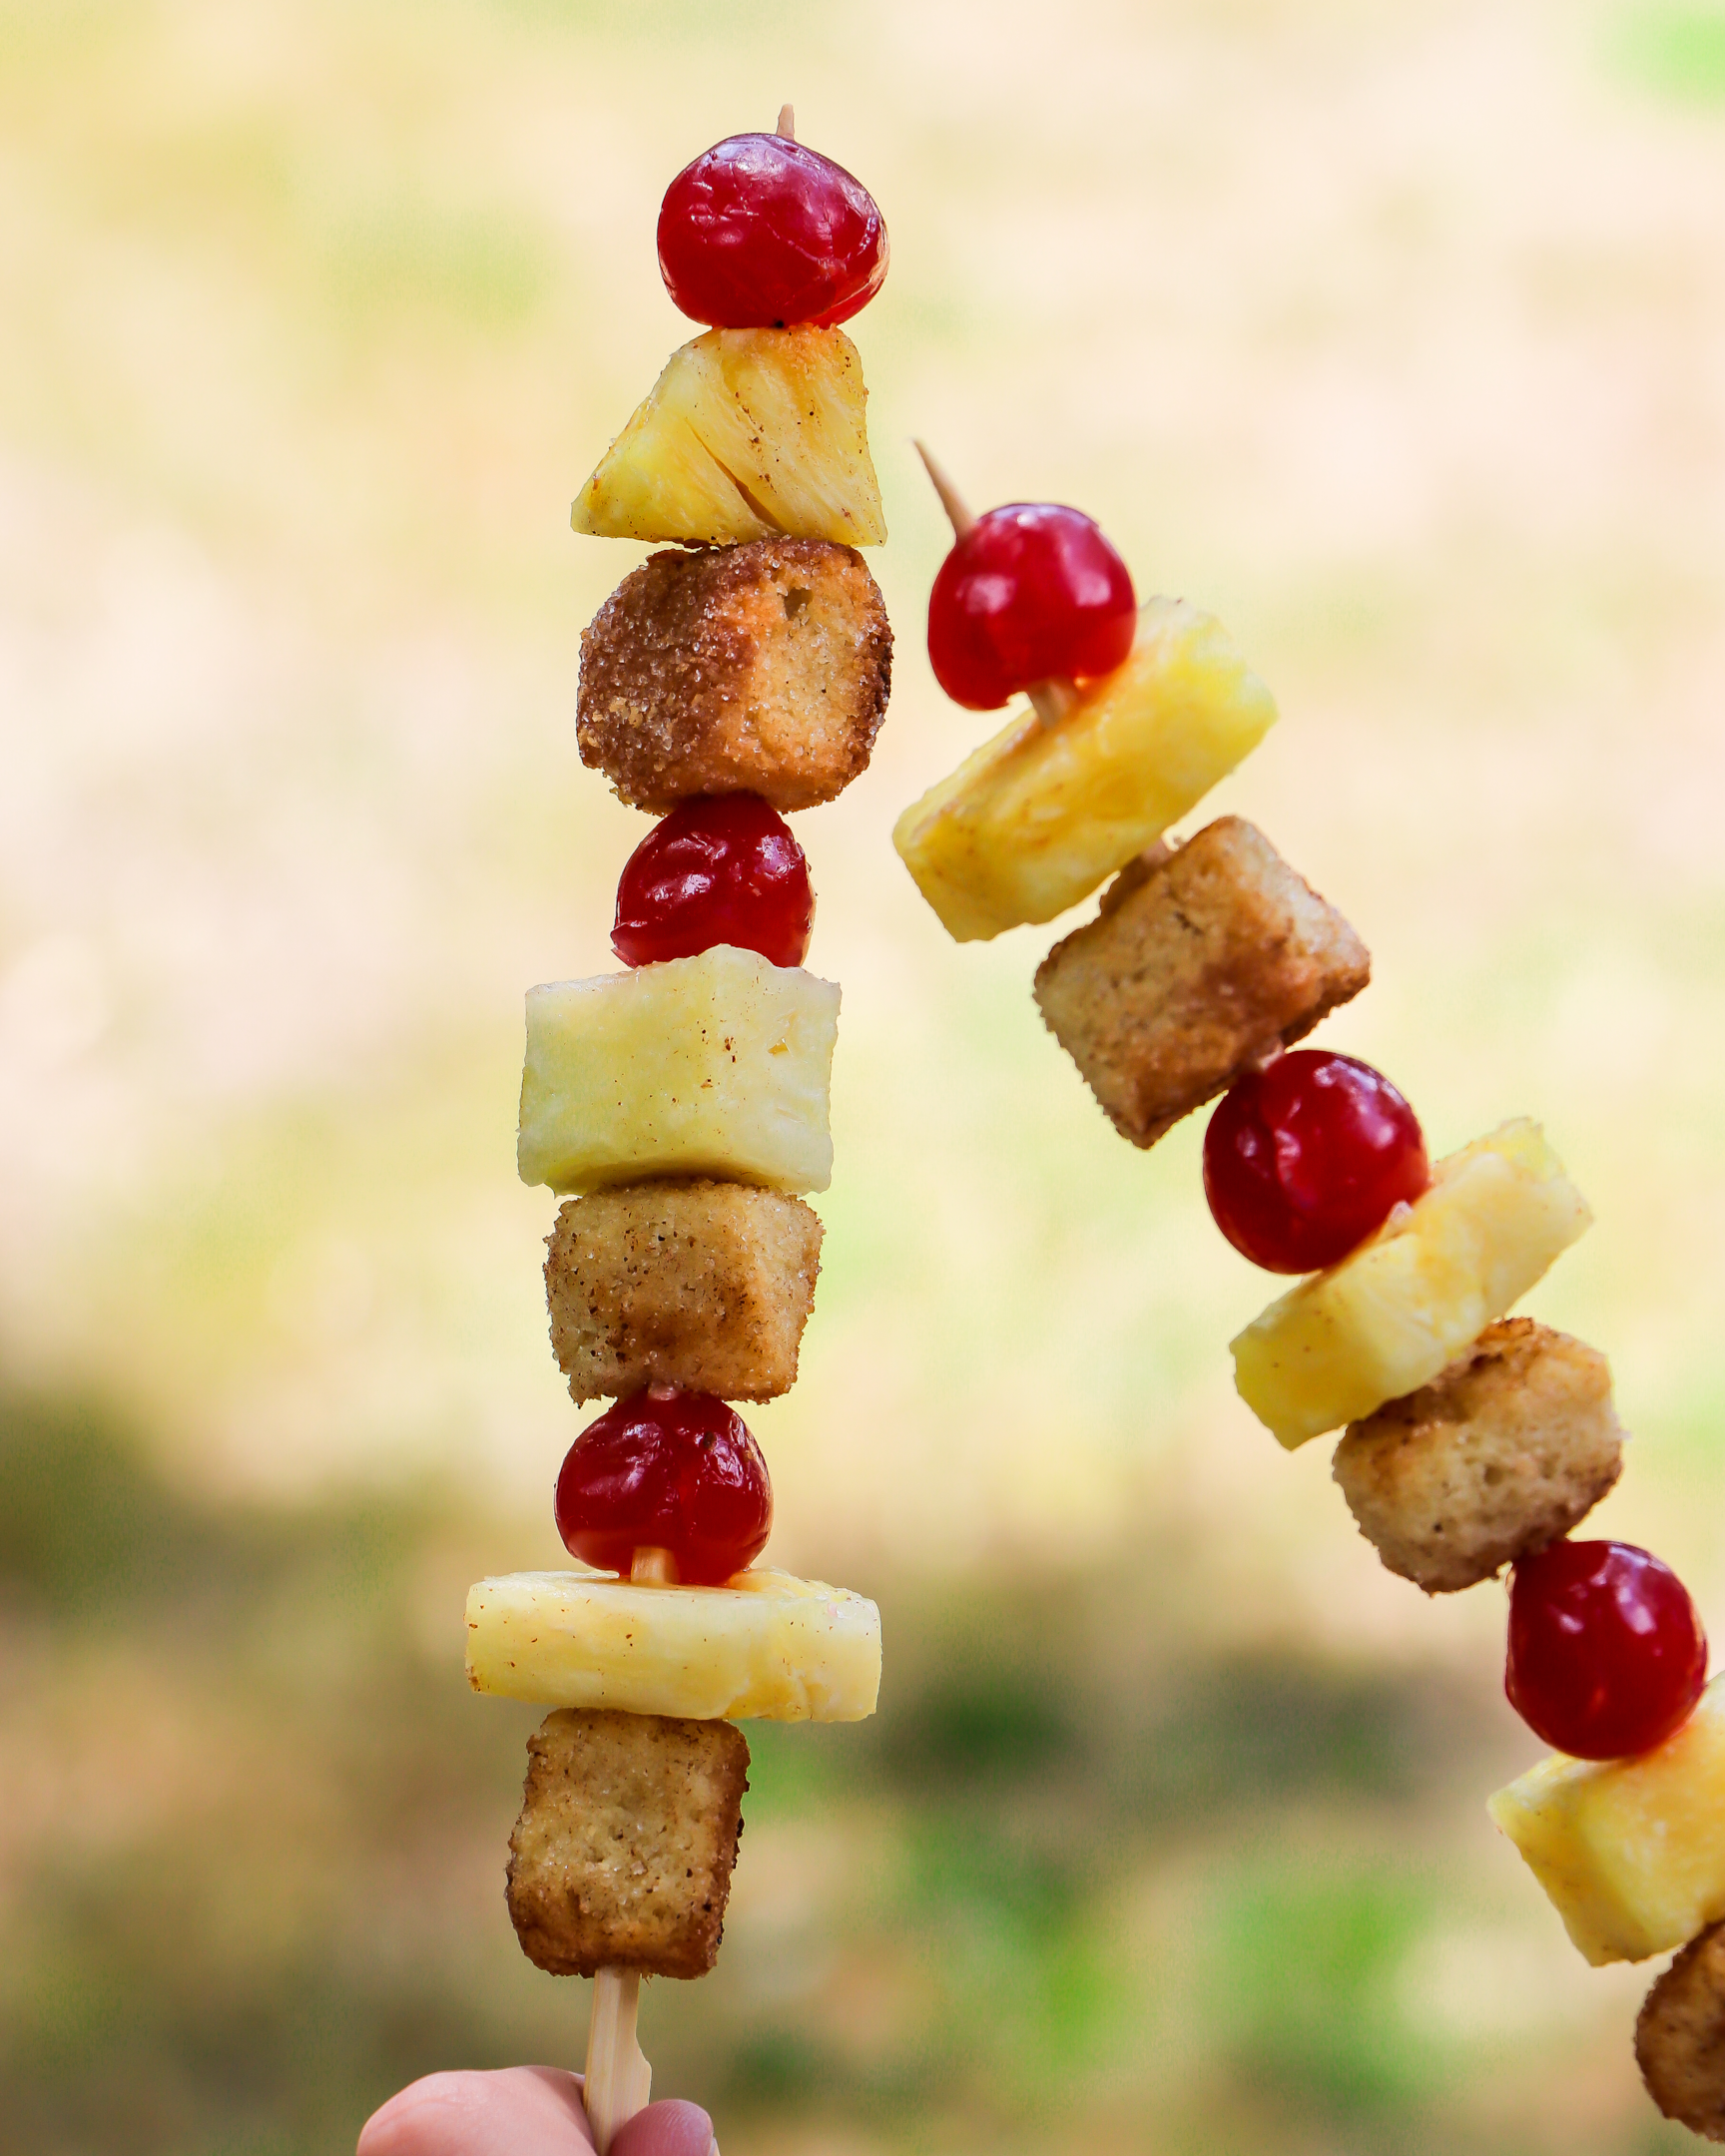 A protein and veggie skewer with crunchy veggies, chicken, and fruit